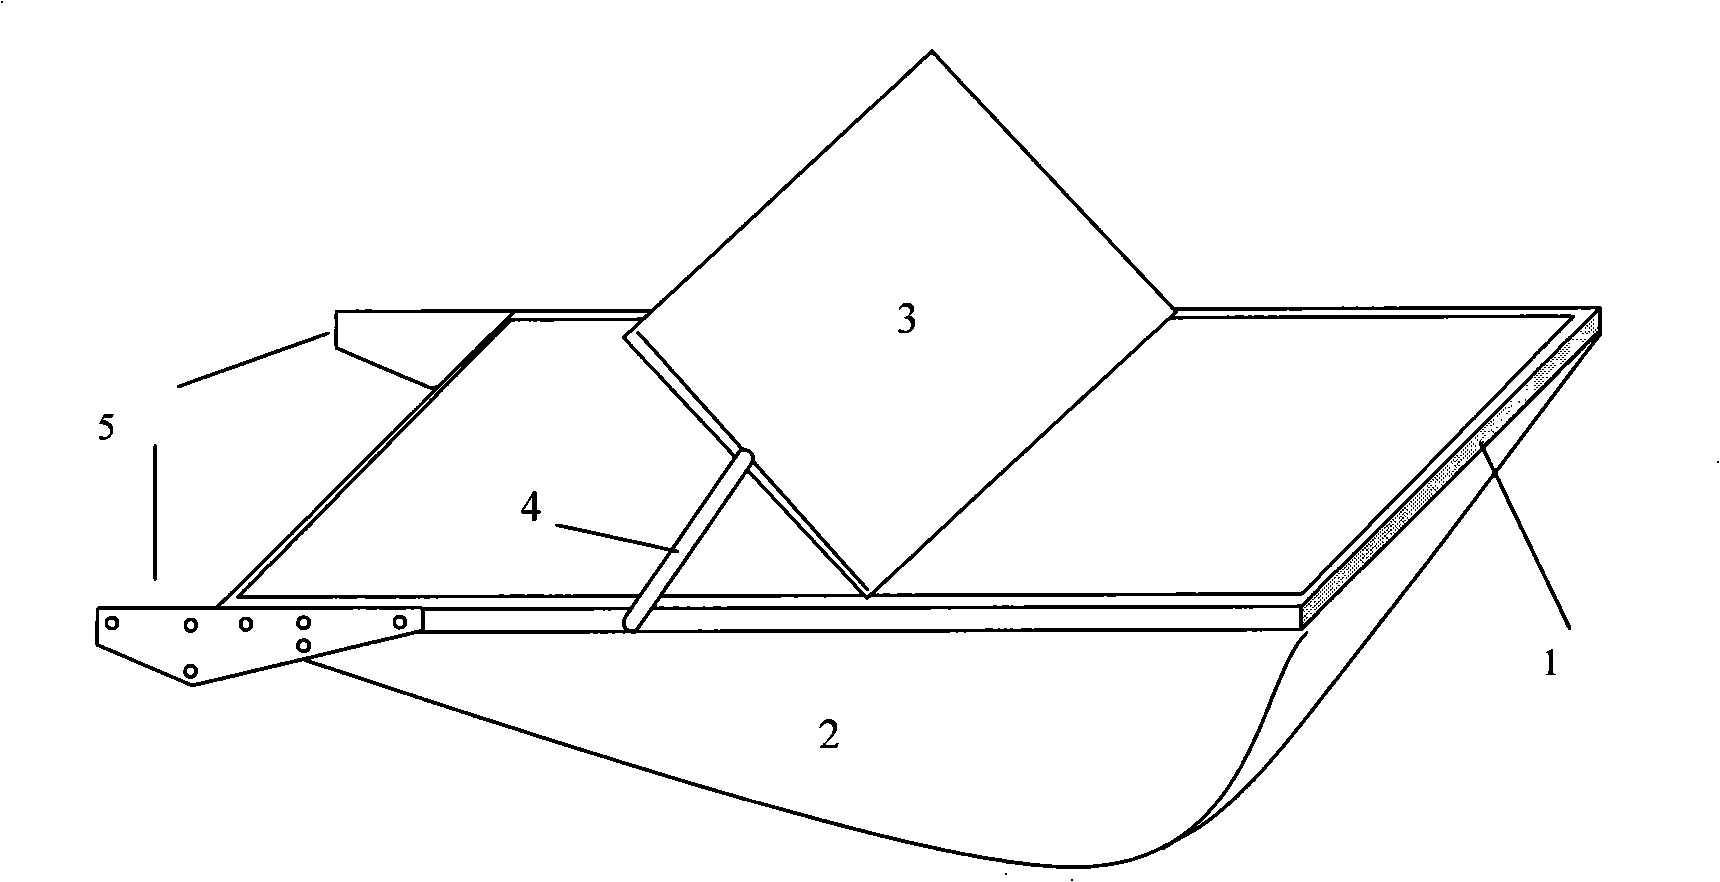 Refraction wind-guiding type fan blade system